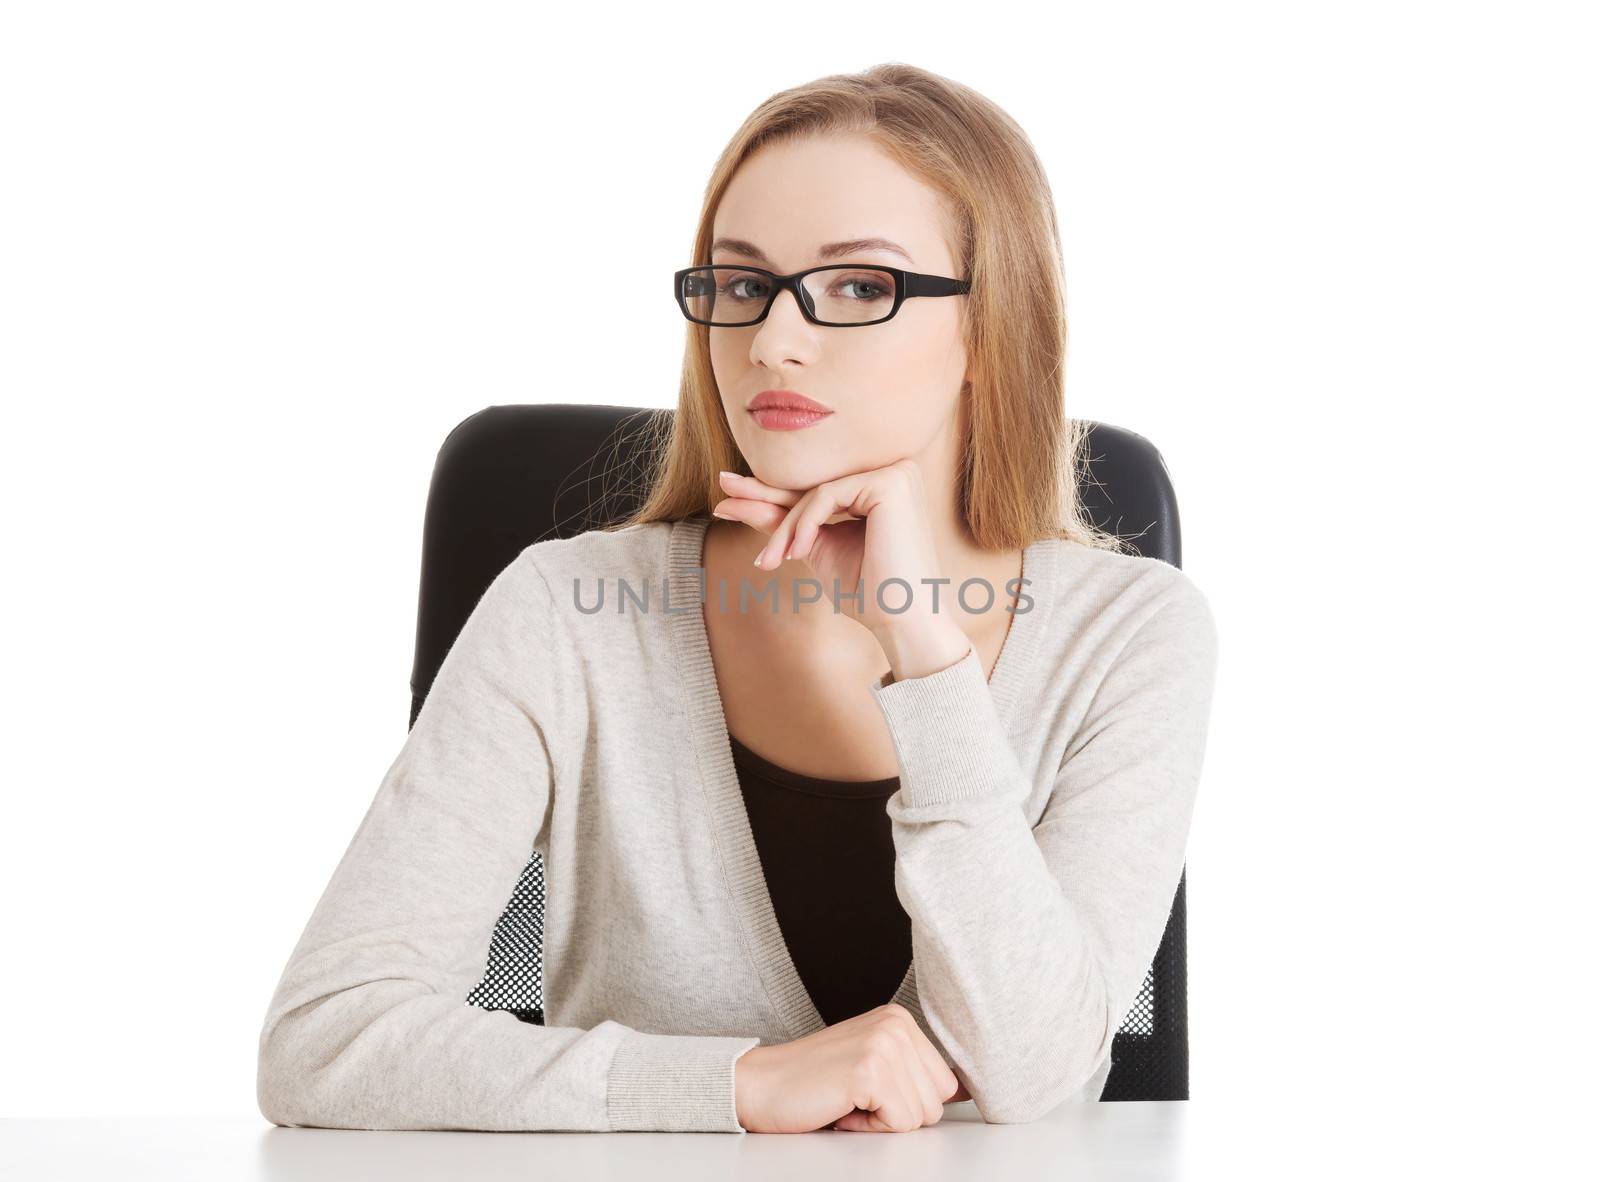 Portrait of beautiful attractive woman in eyeglasses. She's sitting by a desk. Isolated on white.